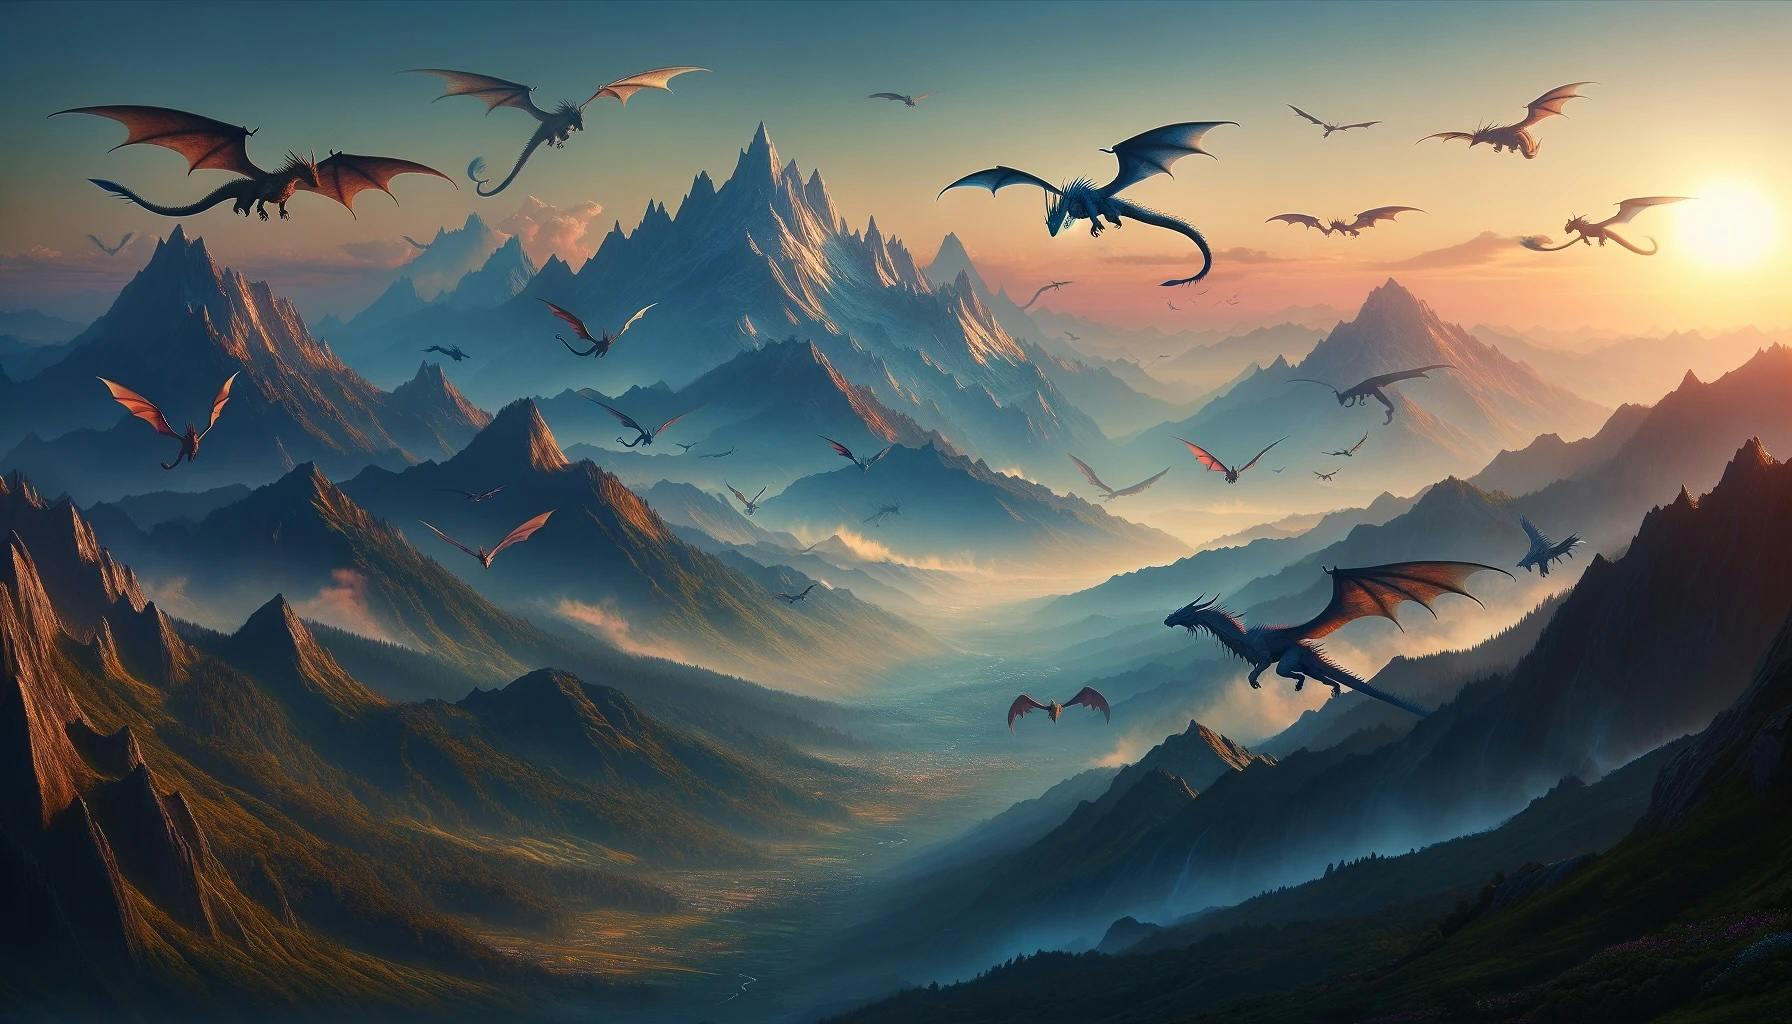 Dragons flying over a vale